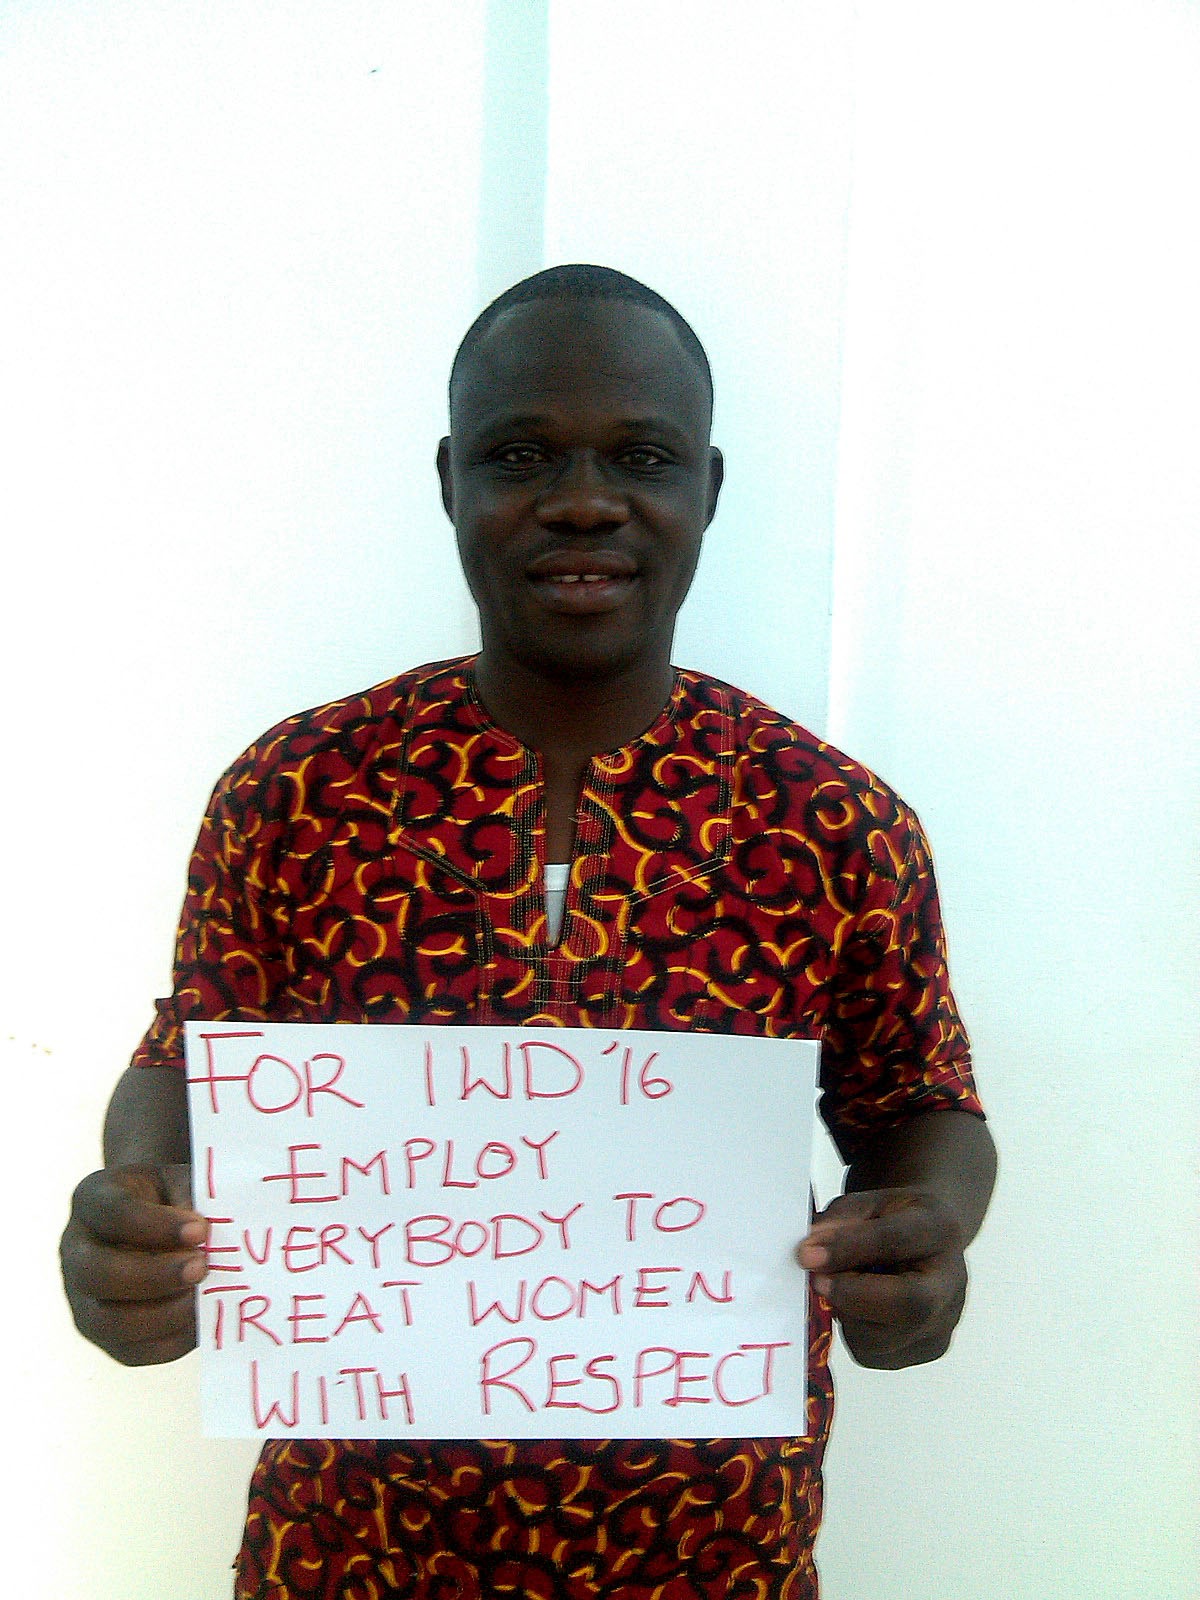 "For IWD ’16, I employ to treat women with respect"